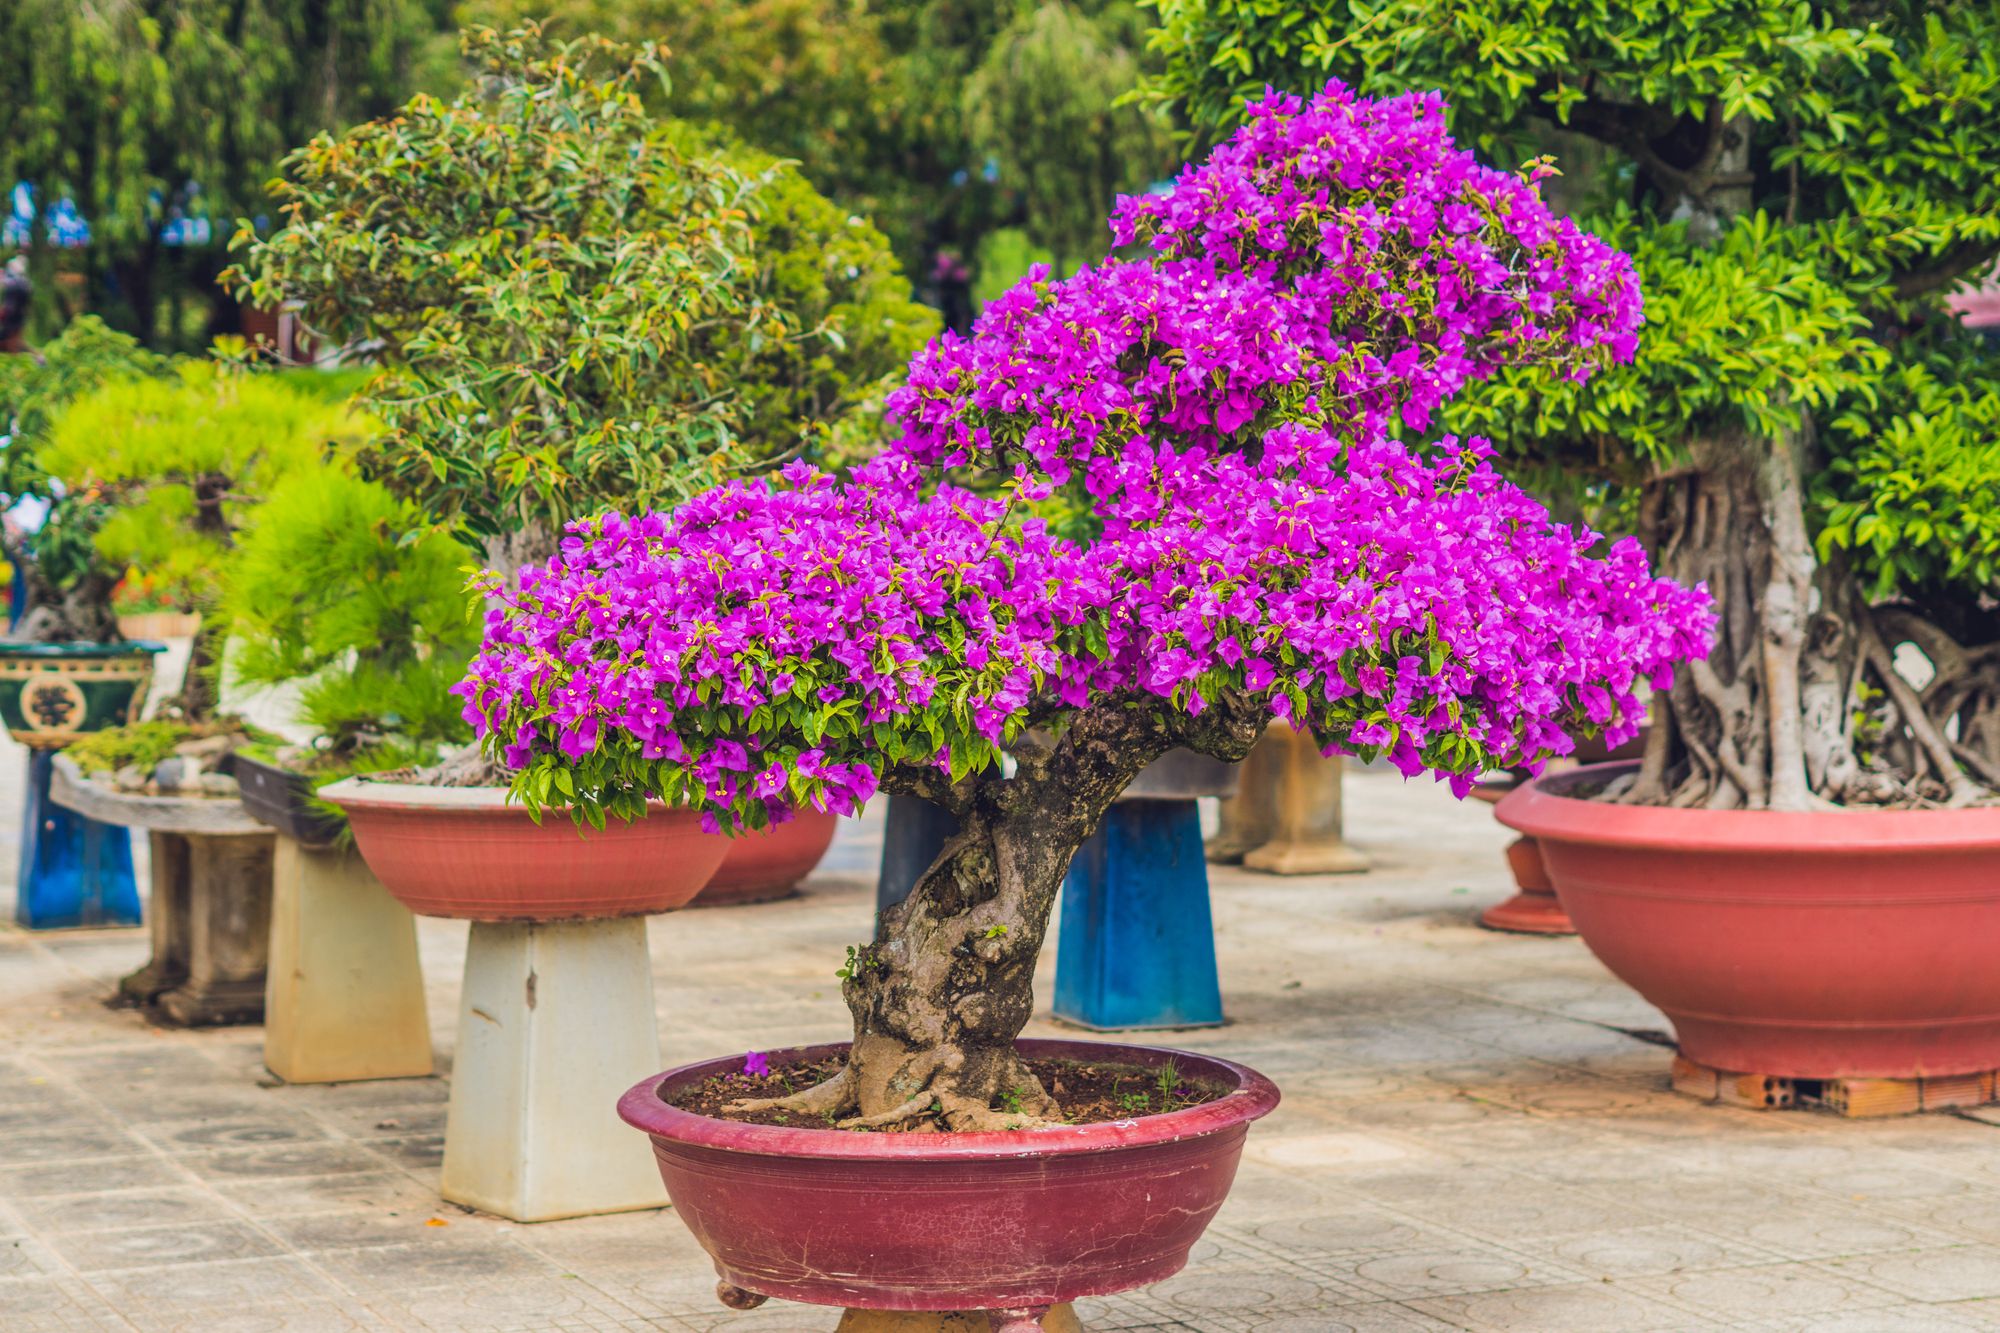 Bonsai planted in a large rounded red pot situated outside surrounded with several bonsai trees